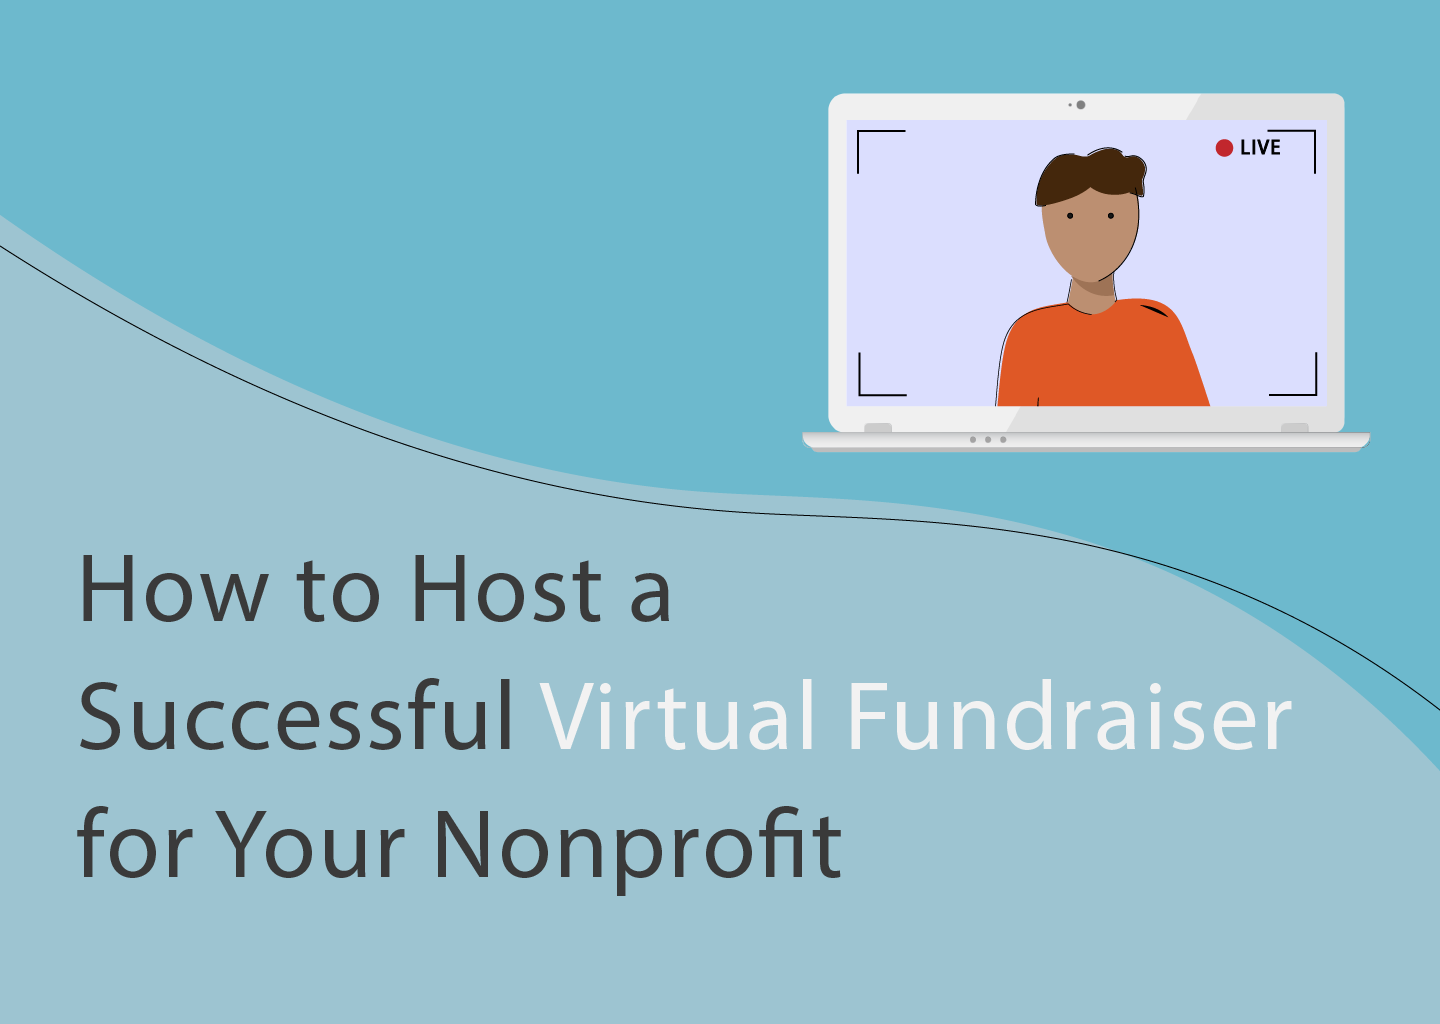 How To Plan a Successful Virtual Fundraiser for your Nonprofit